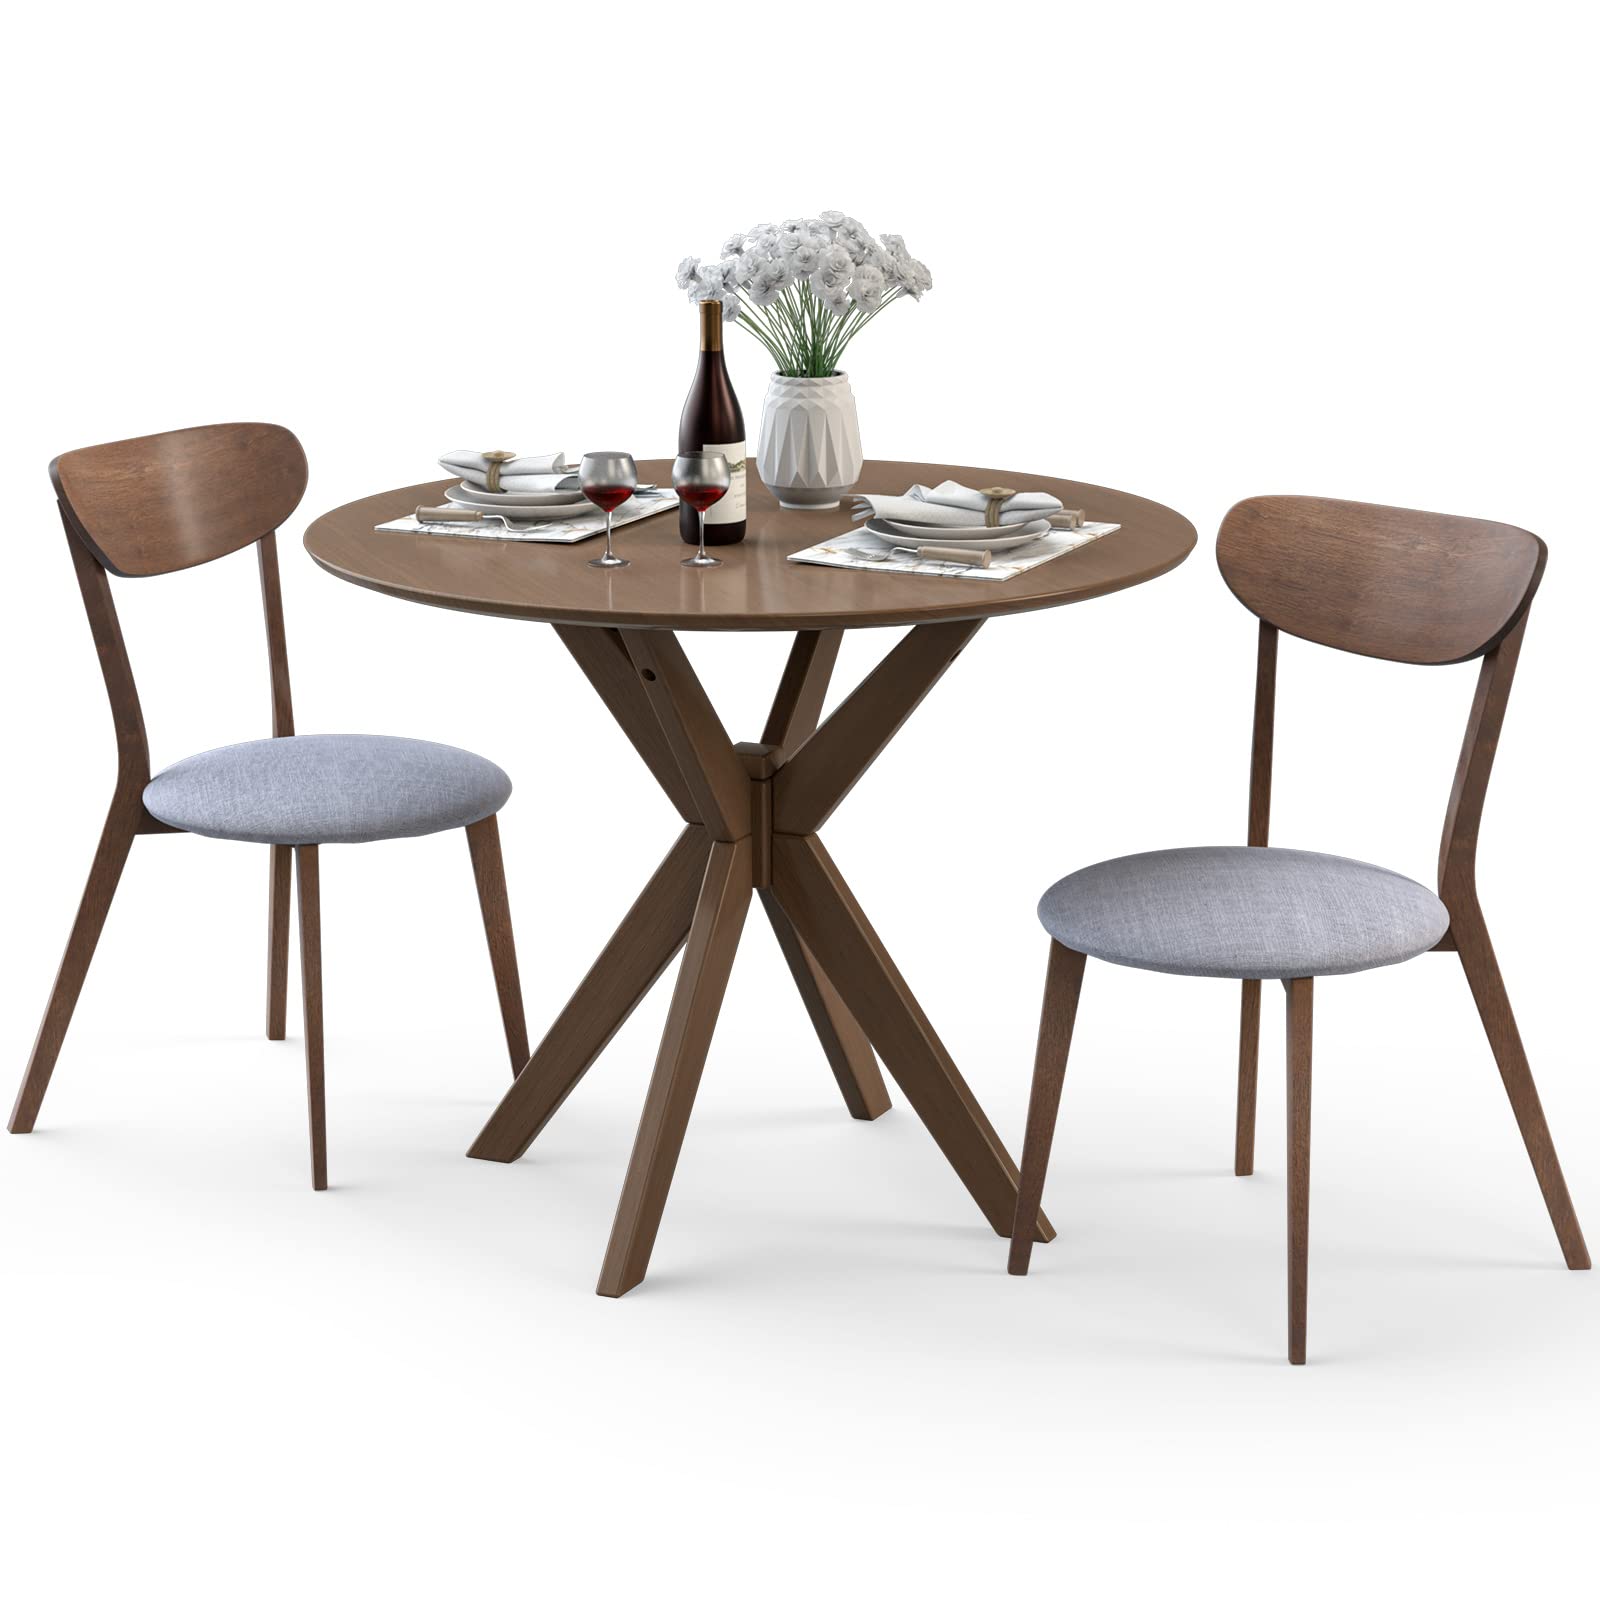 3 Piece Dining Table and Chair Set - Giantex